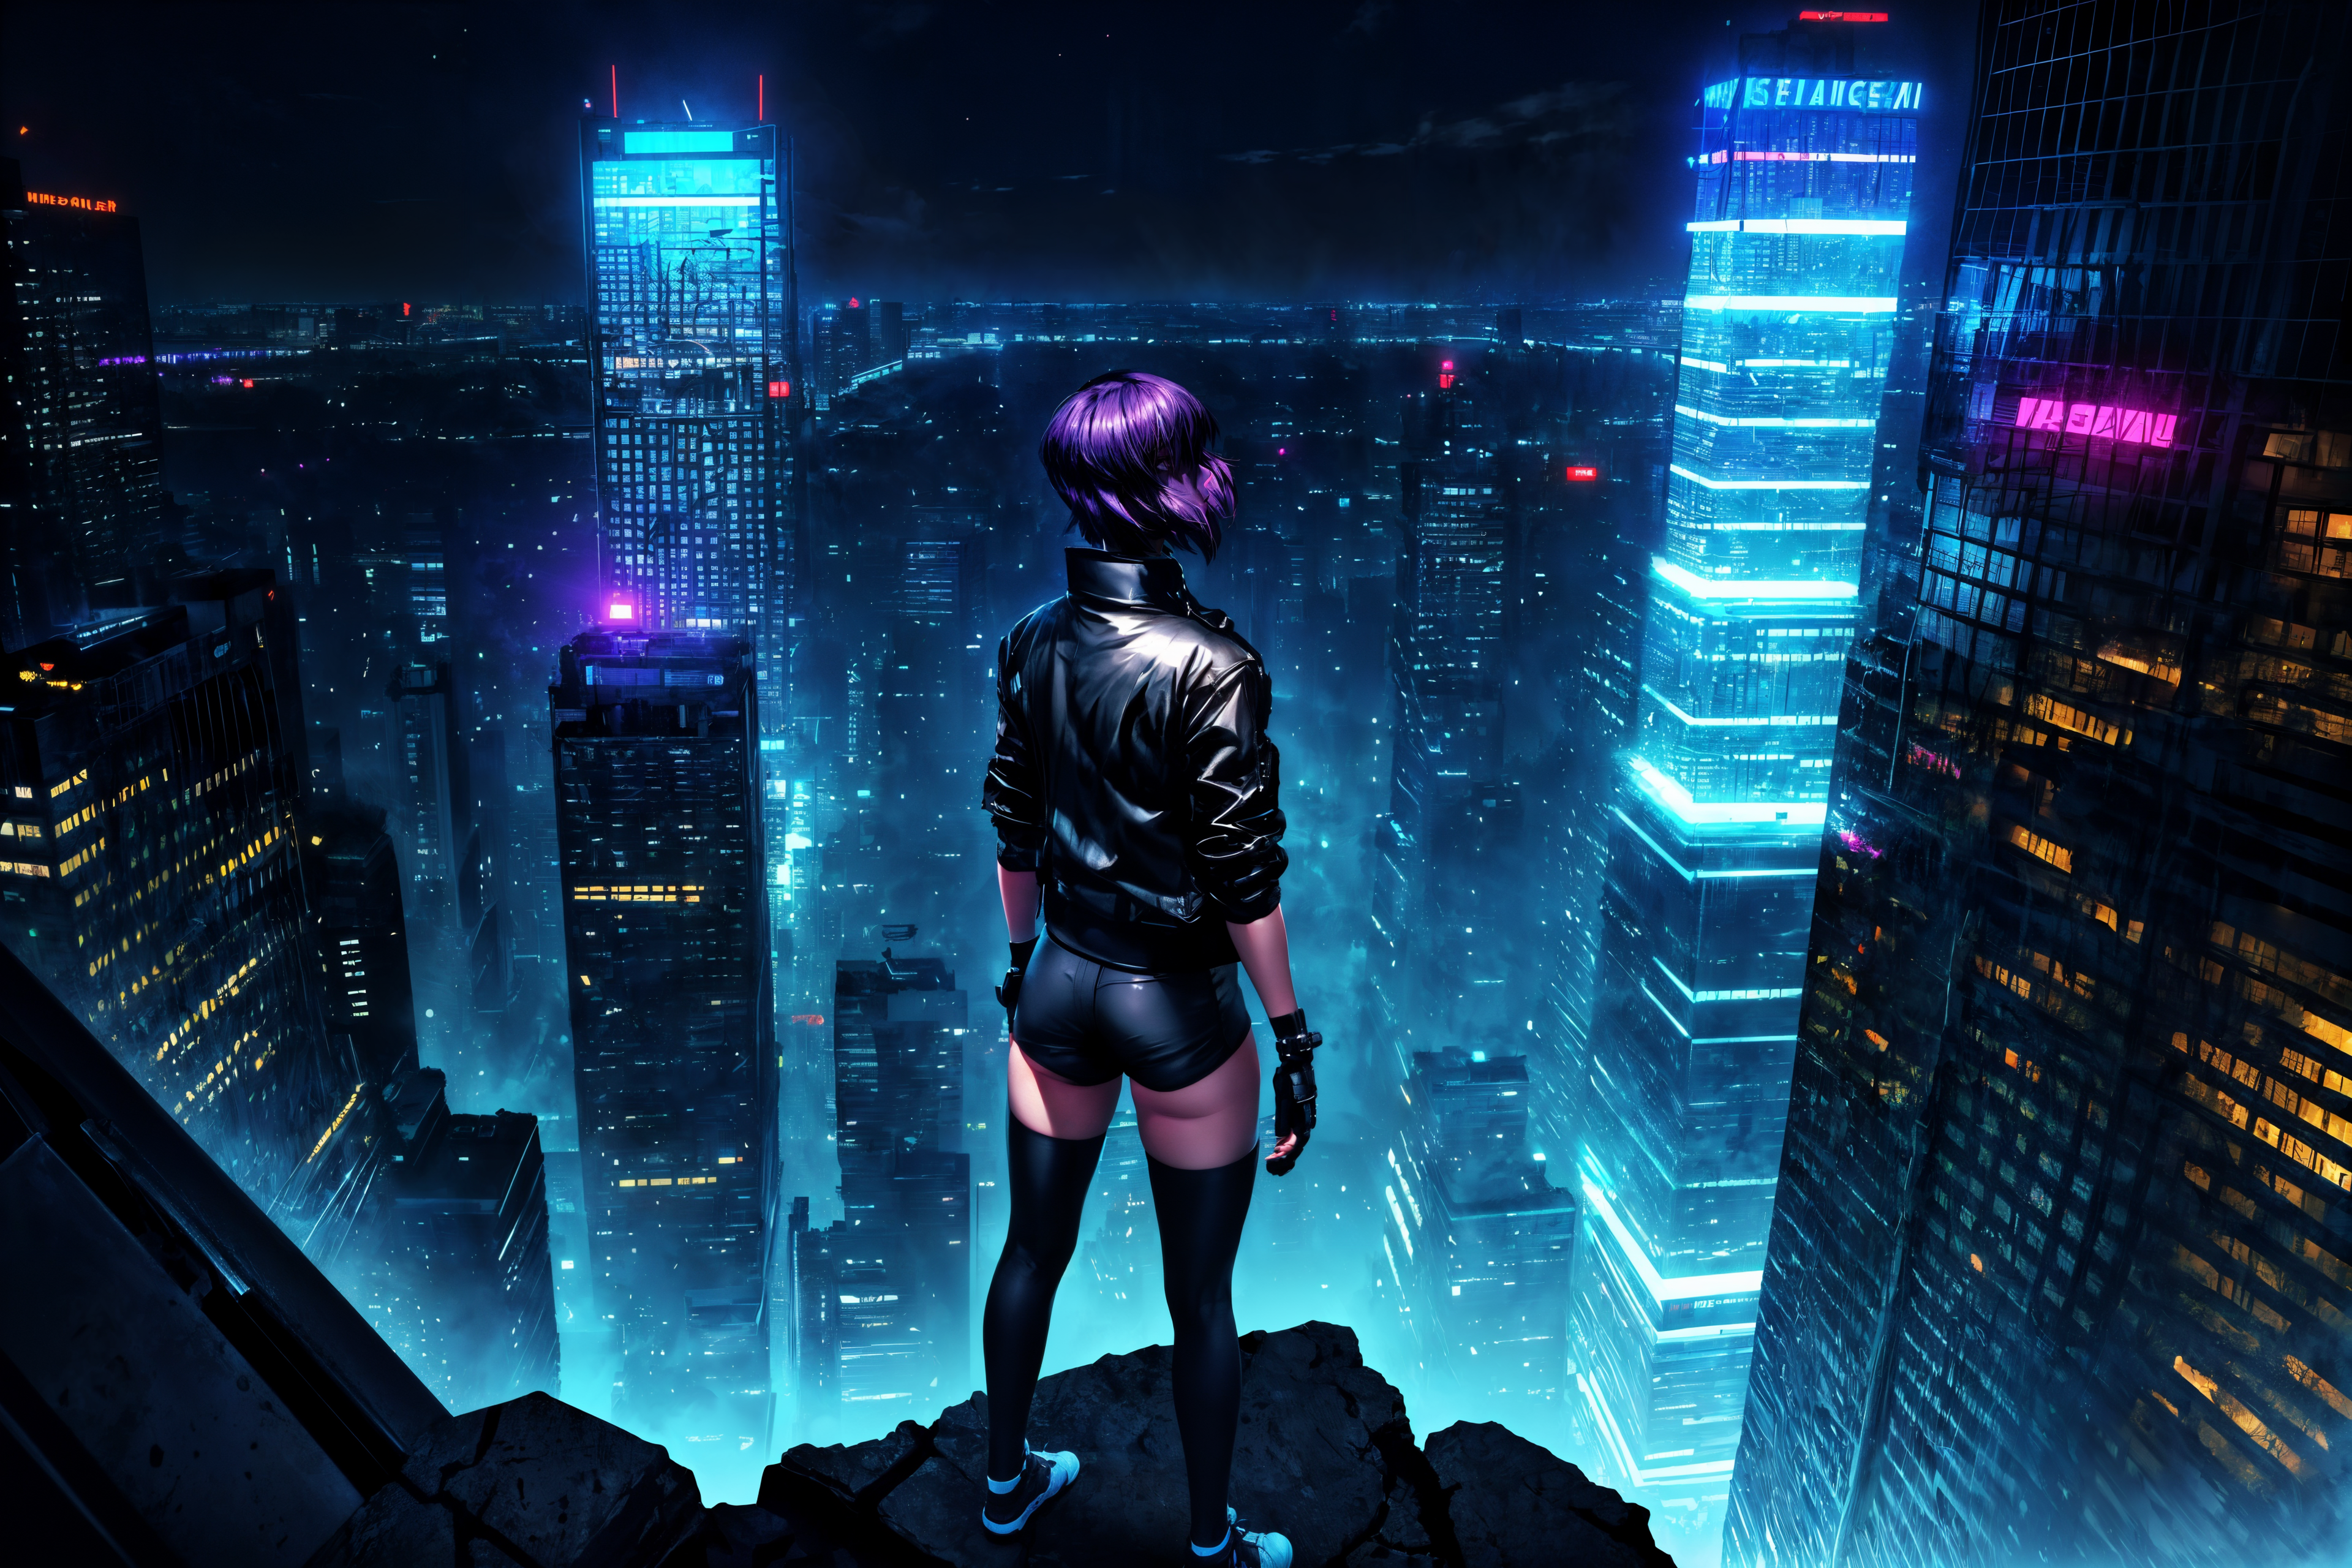 ((hyperrealistic art, extremely high-resolution details, wide angle shot, night, dark theme)) Cyberpunk-inspired artwork d...